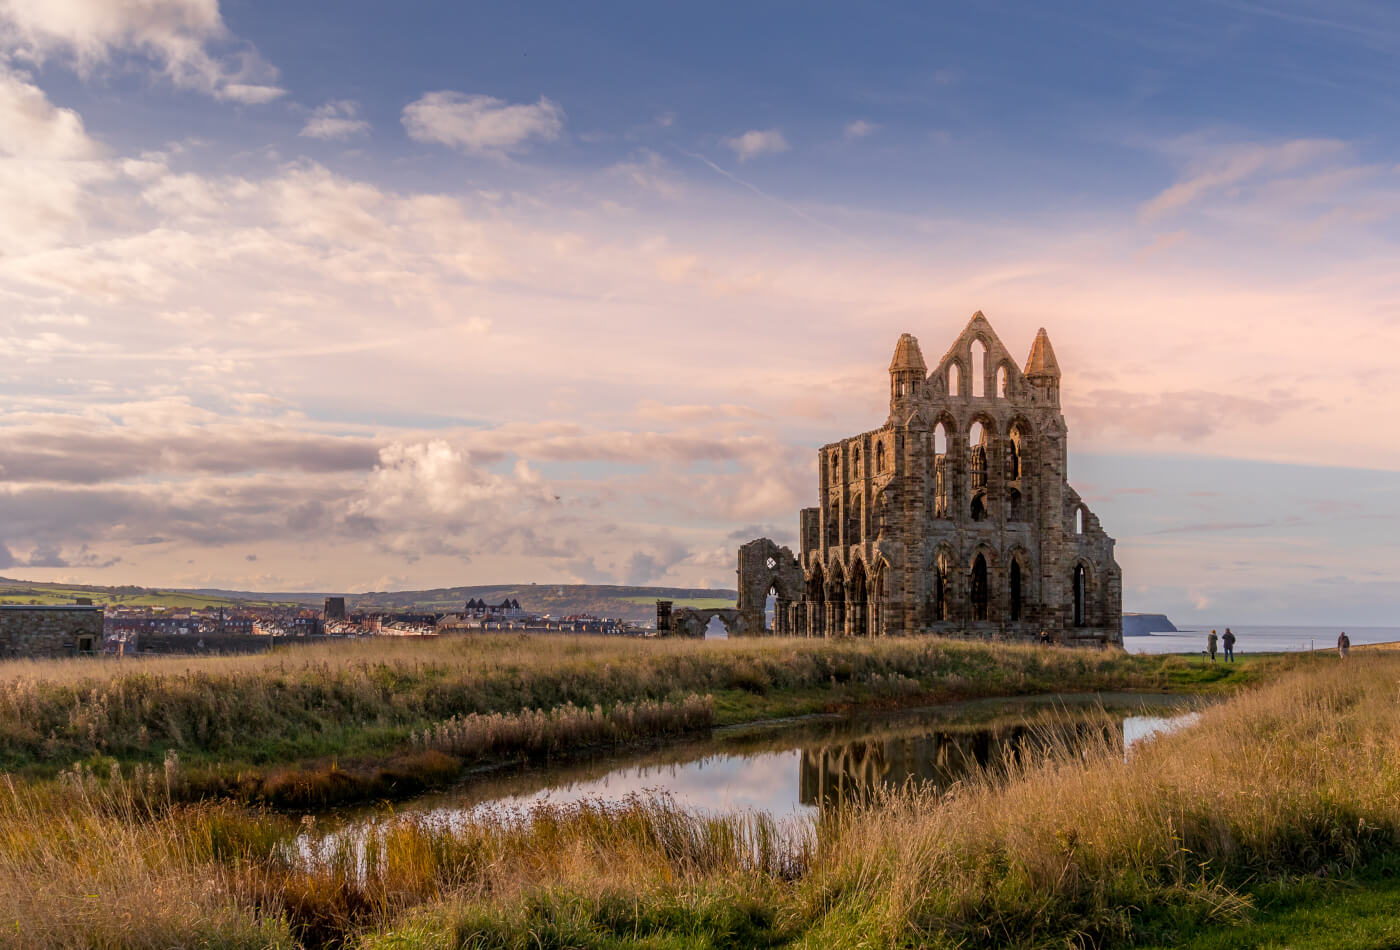 Whitby Abbey and the surrounding greenery as the sun is starting to set